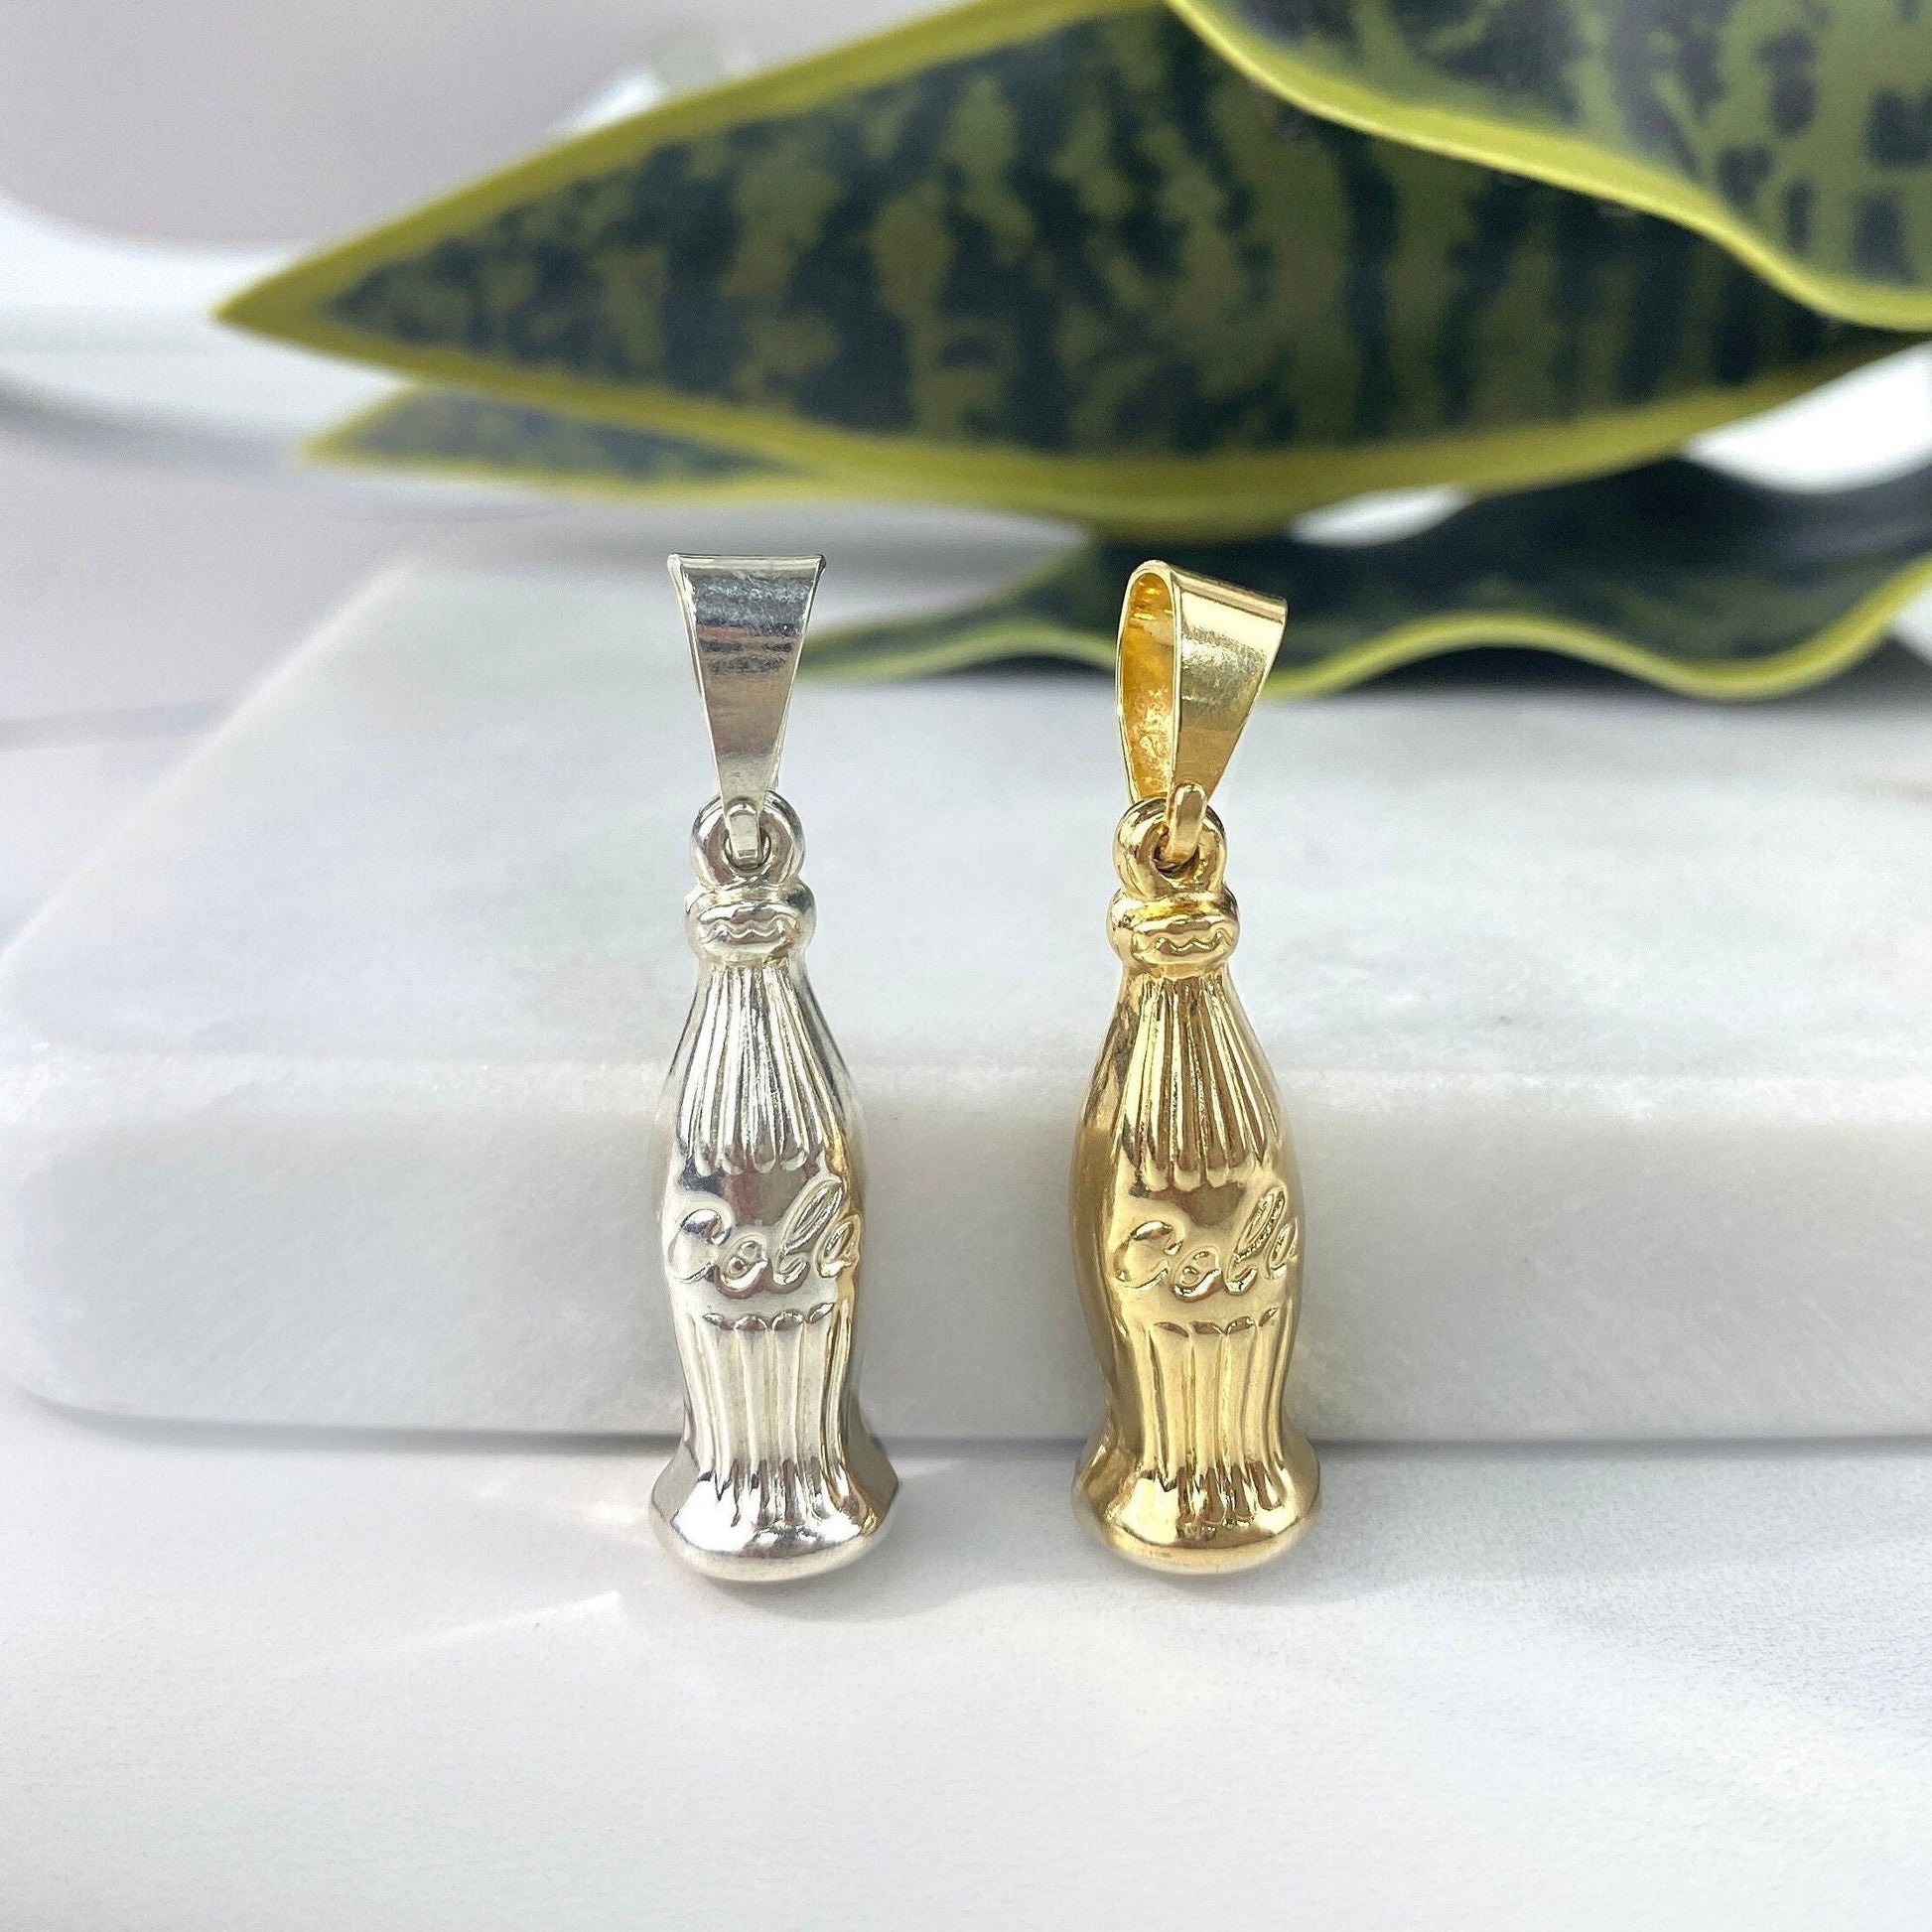 18k Gold Filled Cola Coke Bottle Vintage Style Charms Pendant Wholesale Jewelry Making Supplies